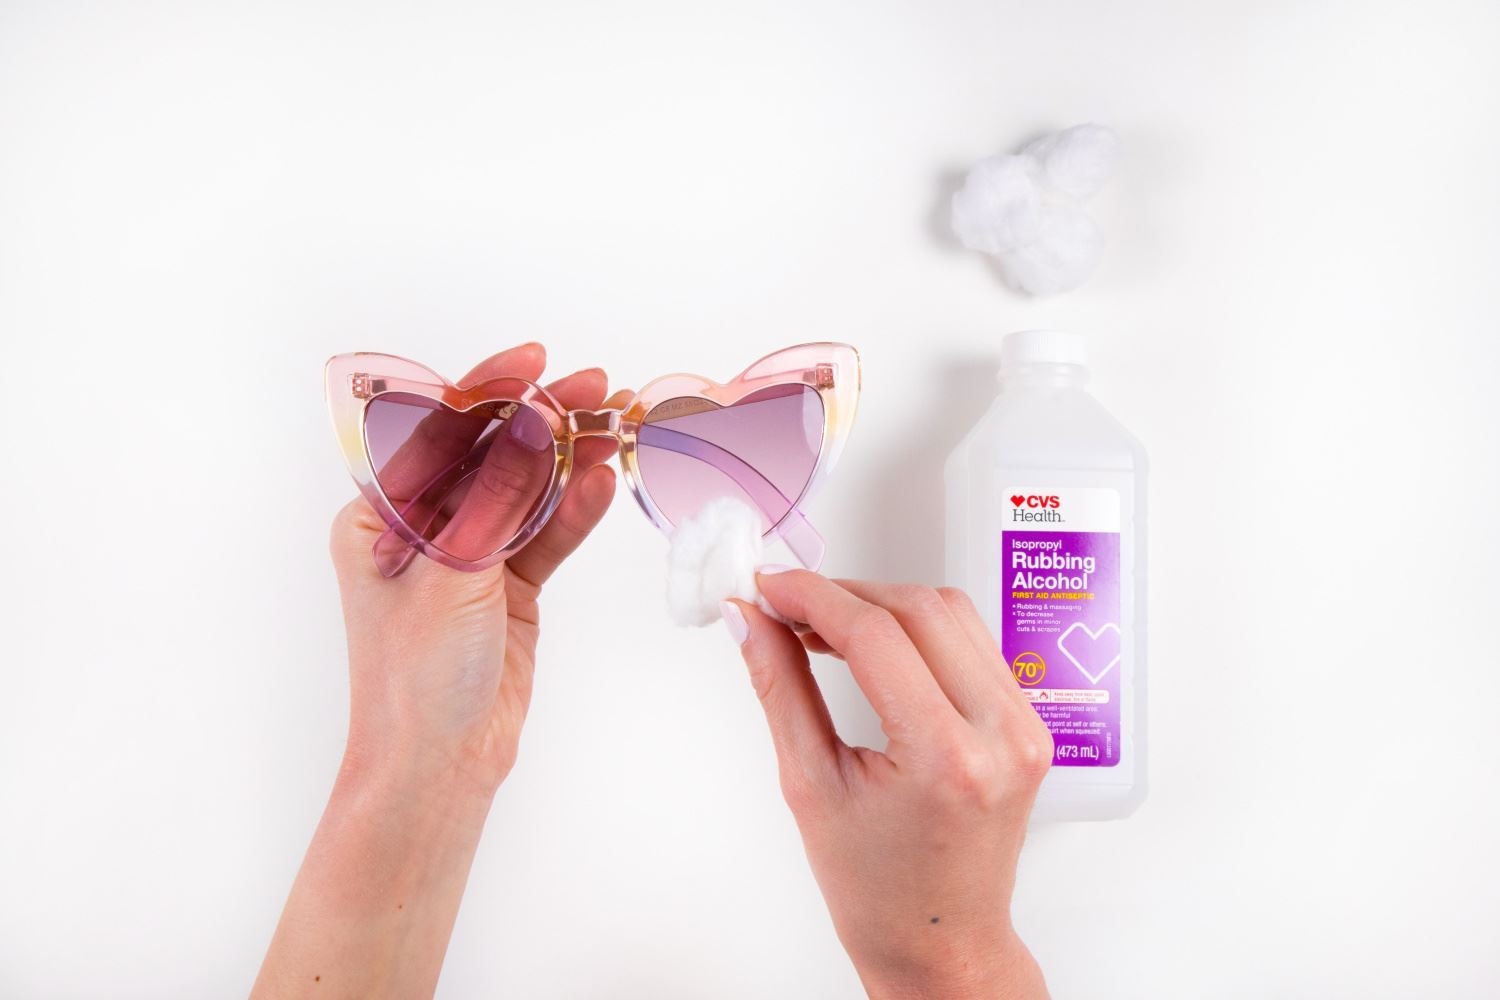 Clean sunglasses with rubbing alcohol